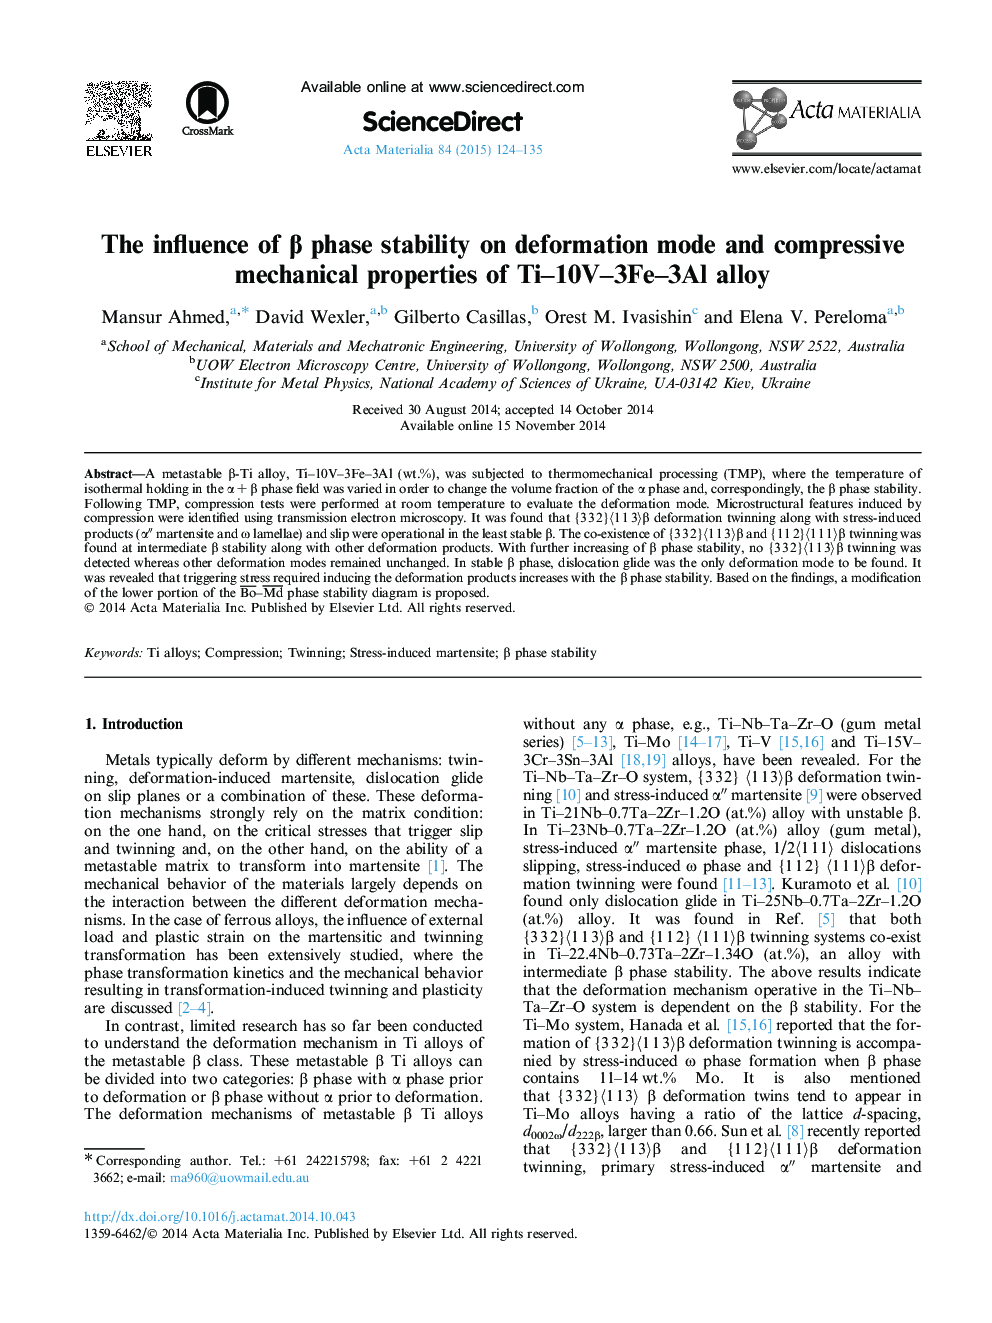 The influence of β phase stability on deformation mode and compressive mechanical properties of Ti–10V–3Fe–3Al alloy